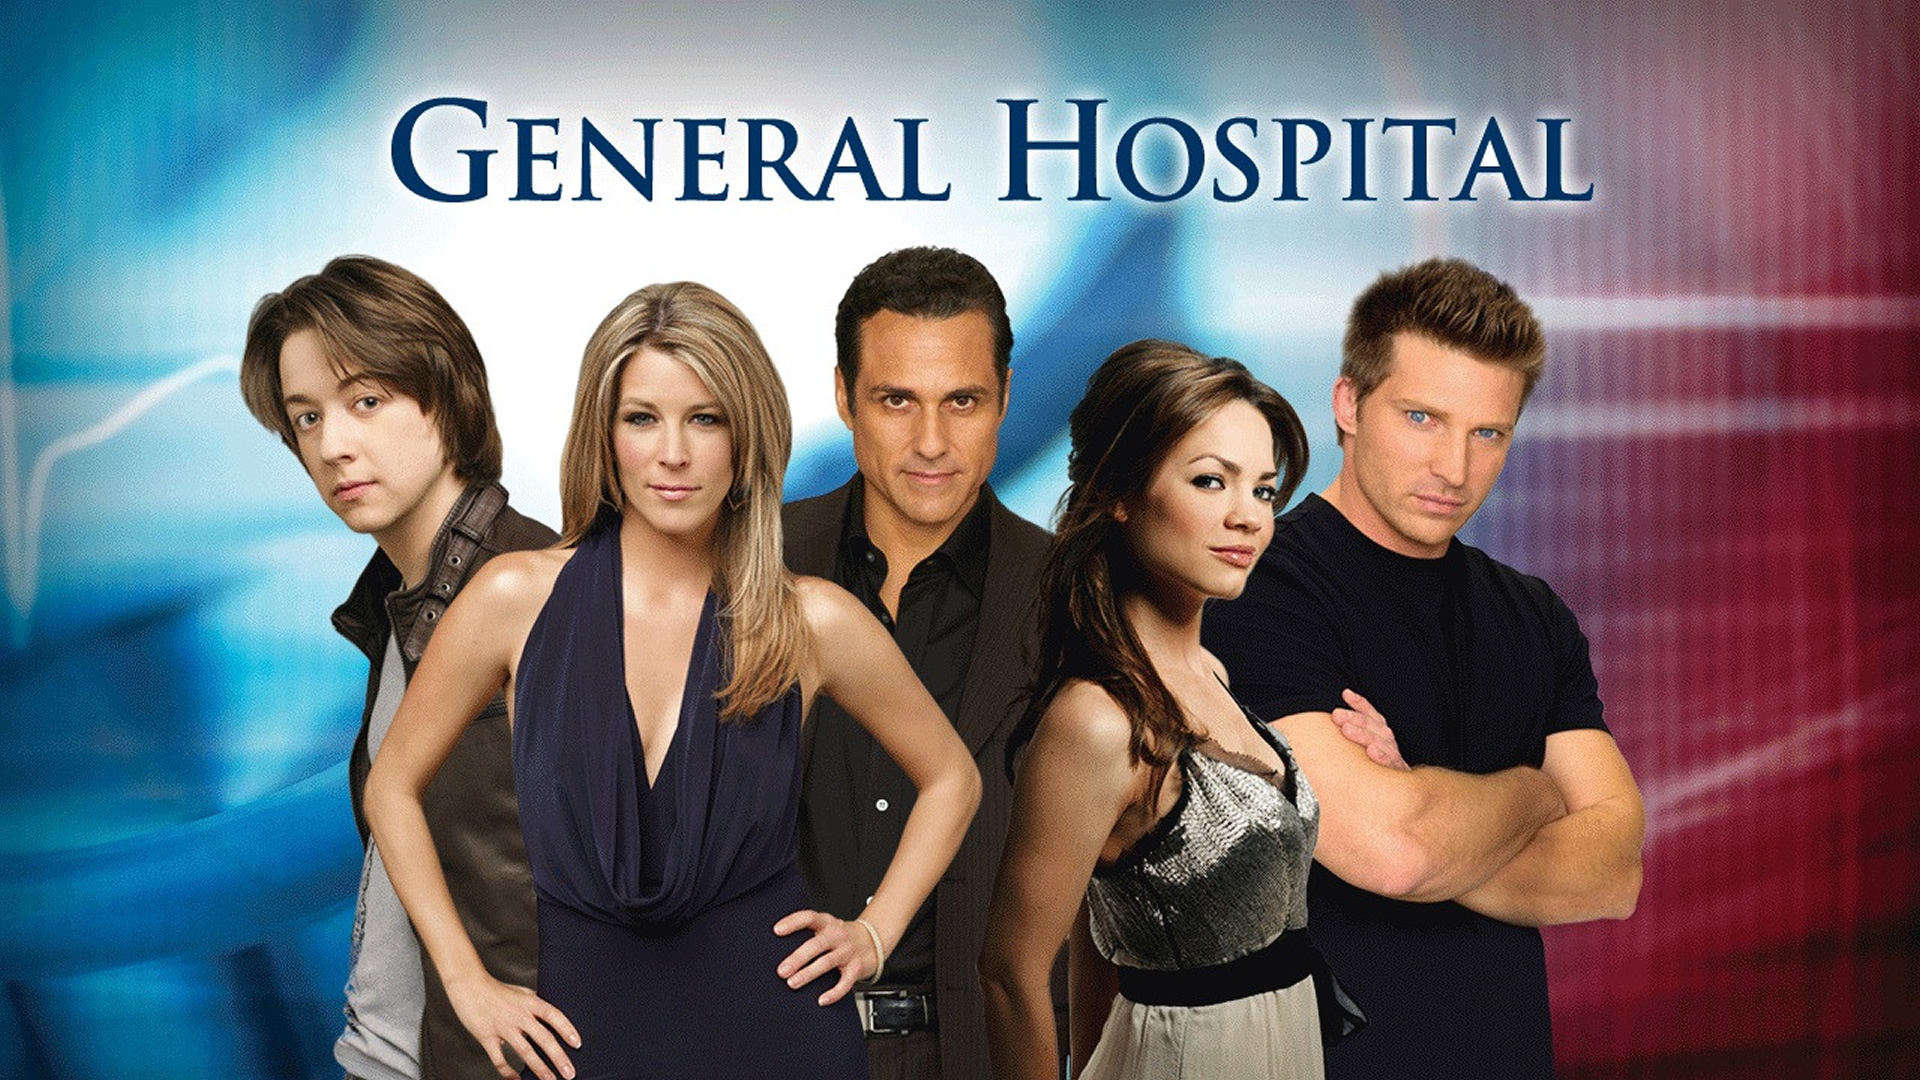 General Hospital Season 59 Sonny Heading Back To Port Charles To Get His Wife GH Spoilers!